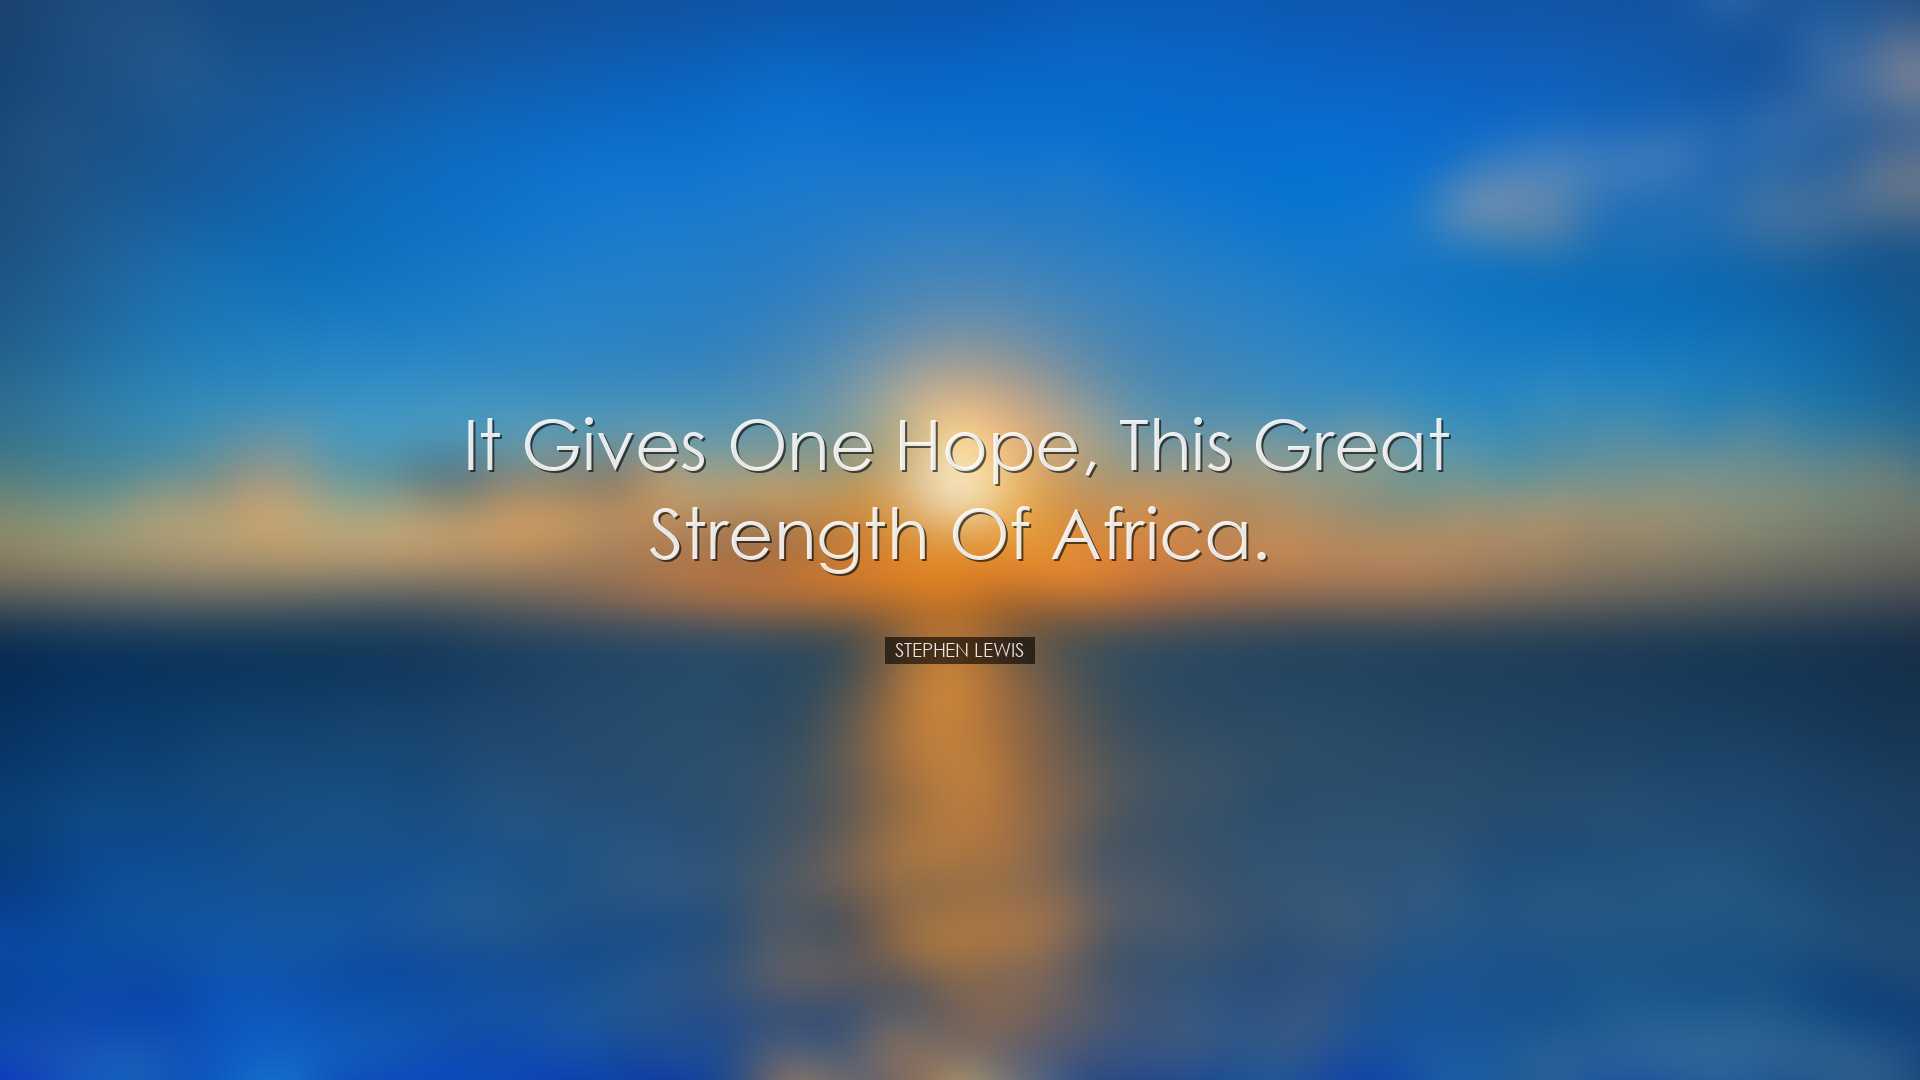 It gives one hope, this great strength of Africa. - Stephen Lewis